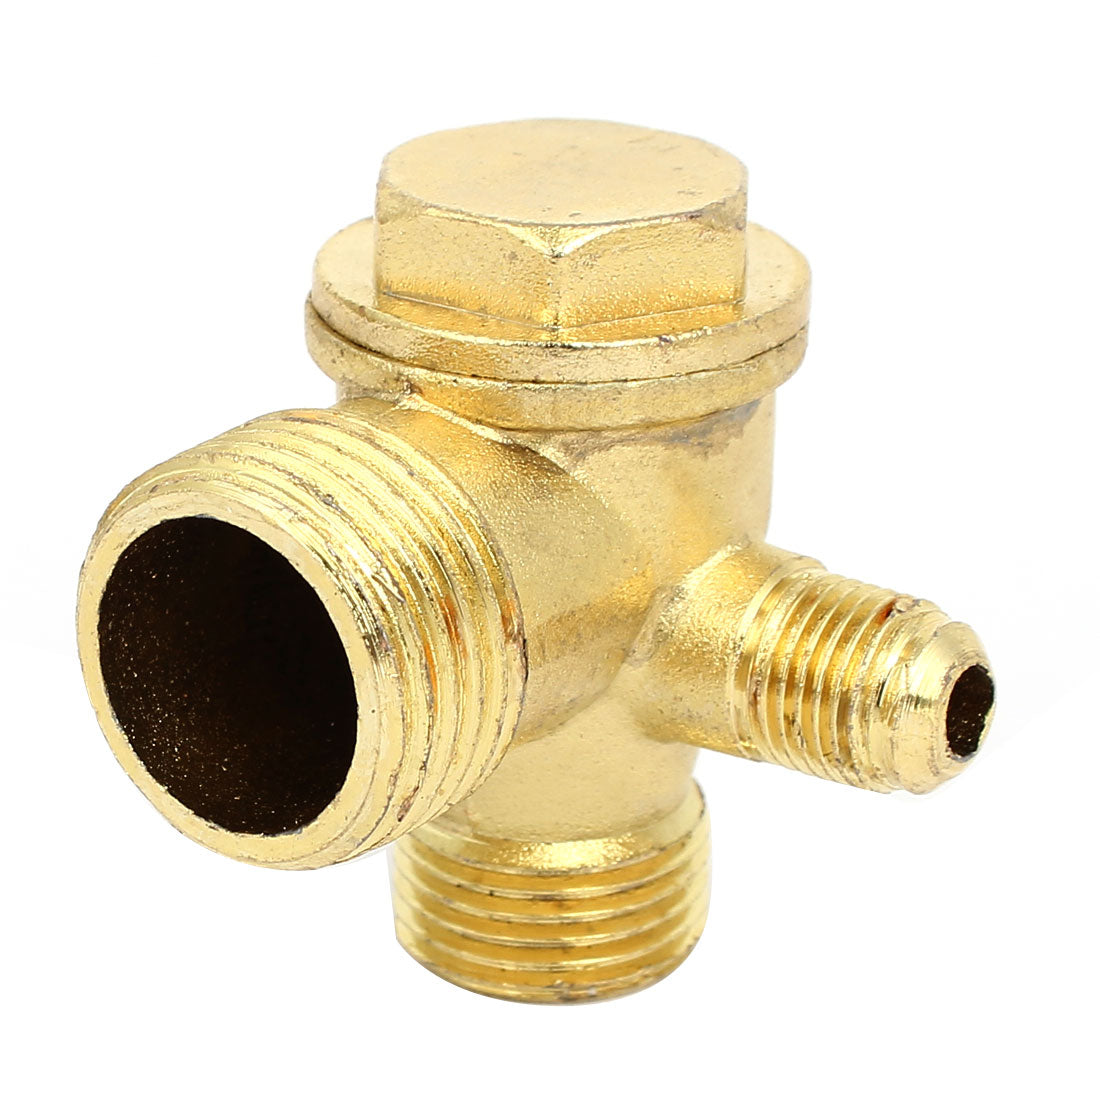 uxcell Uxcell G1/2xG3/8xG1/8 Male Thread 3-Way Vertical Air Compressor Fittings Check Valve